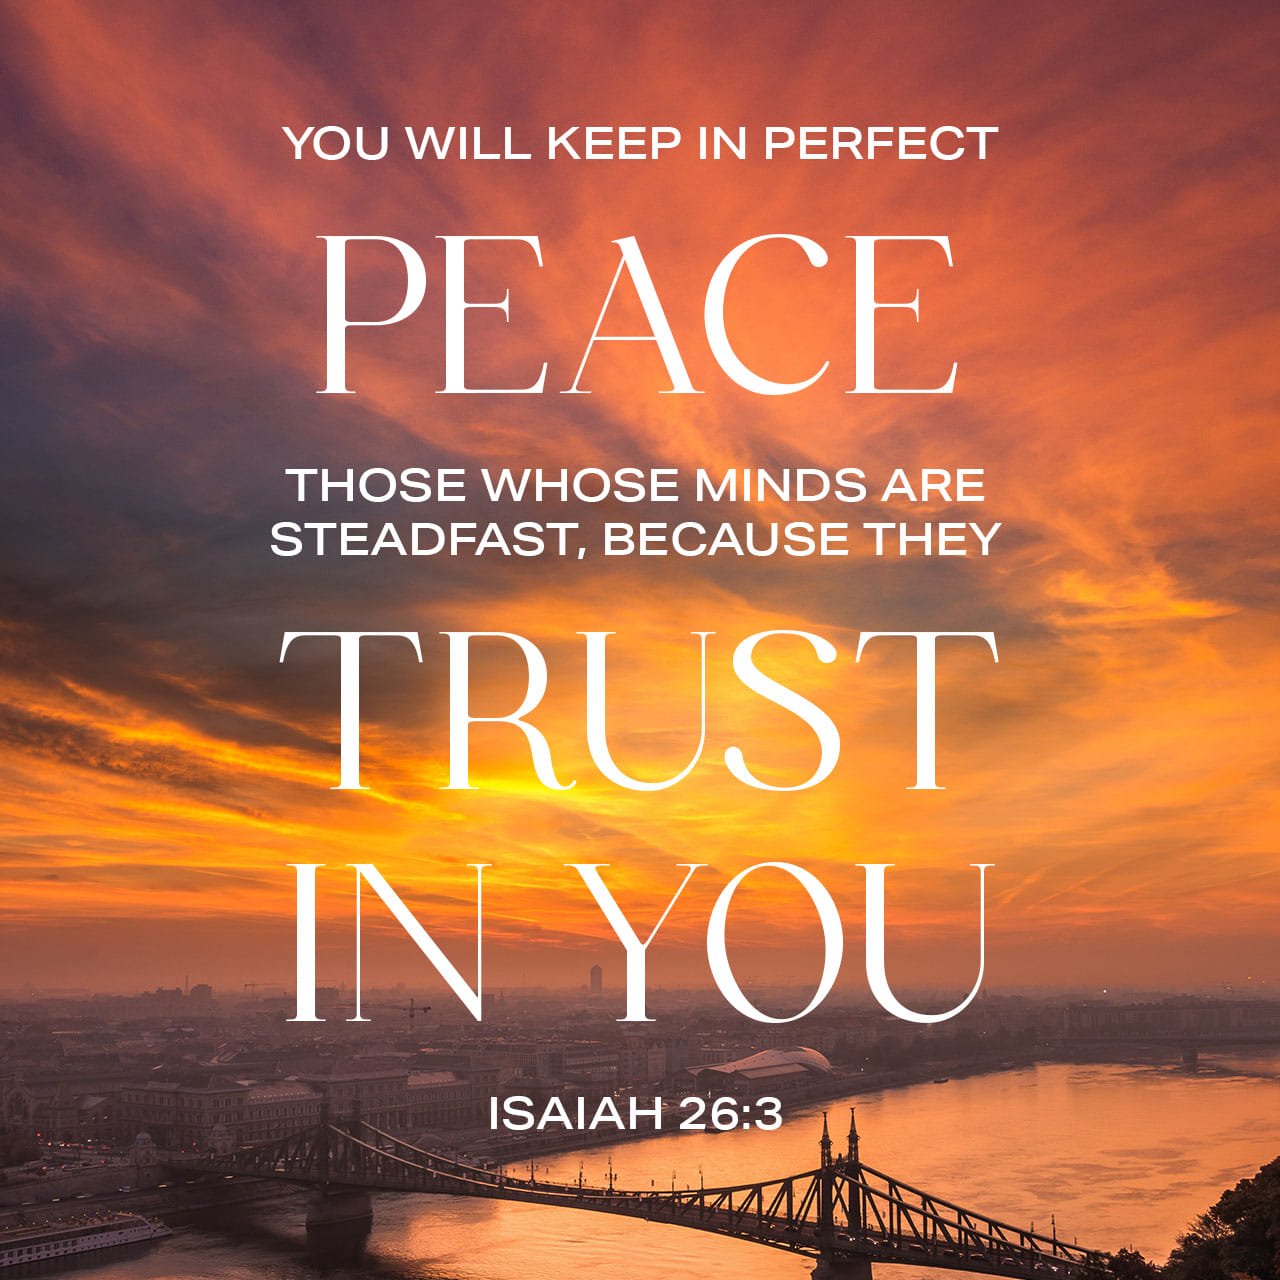 YOU WILL KEEP IN PERFECT PEACE THOSE WHOSE MINDS ARE STEADFAST; BECAUSE THEY TRUST IN YOU ISAIAH 26.3